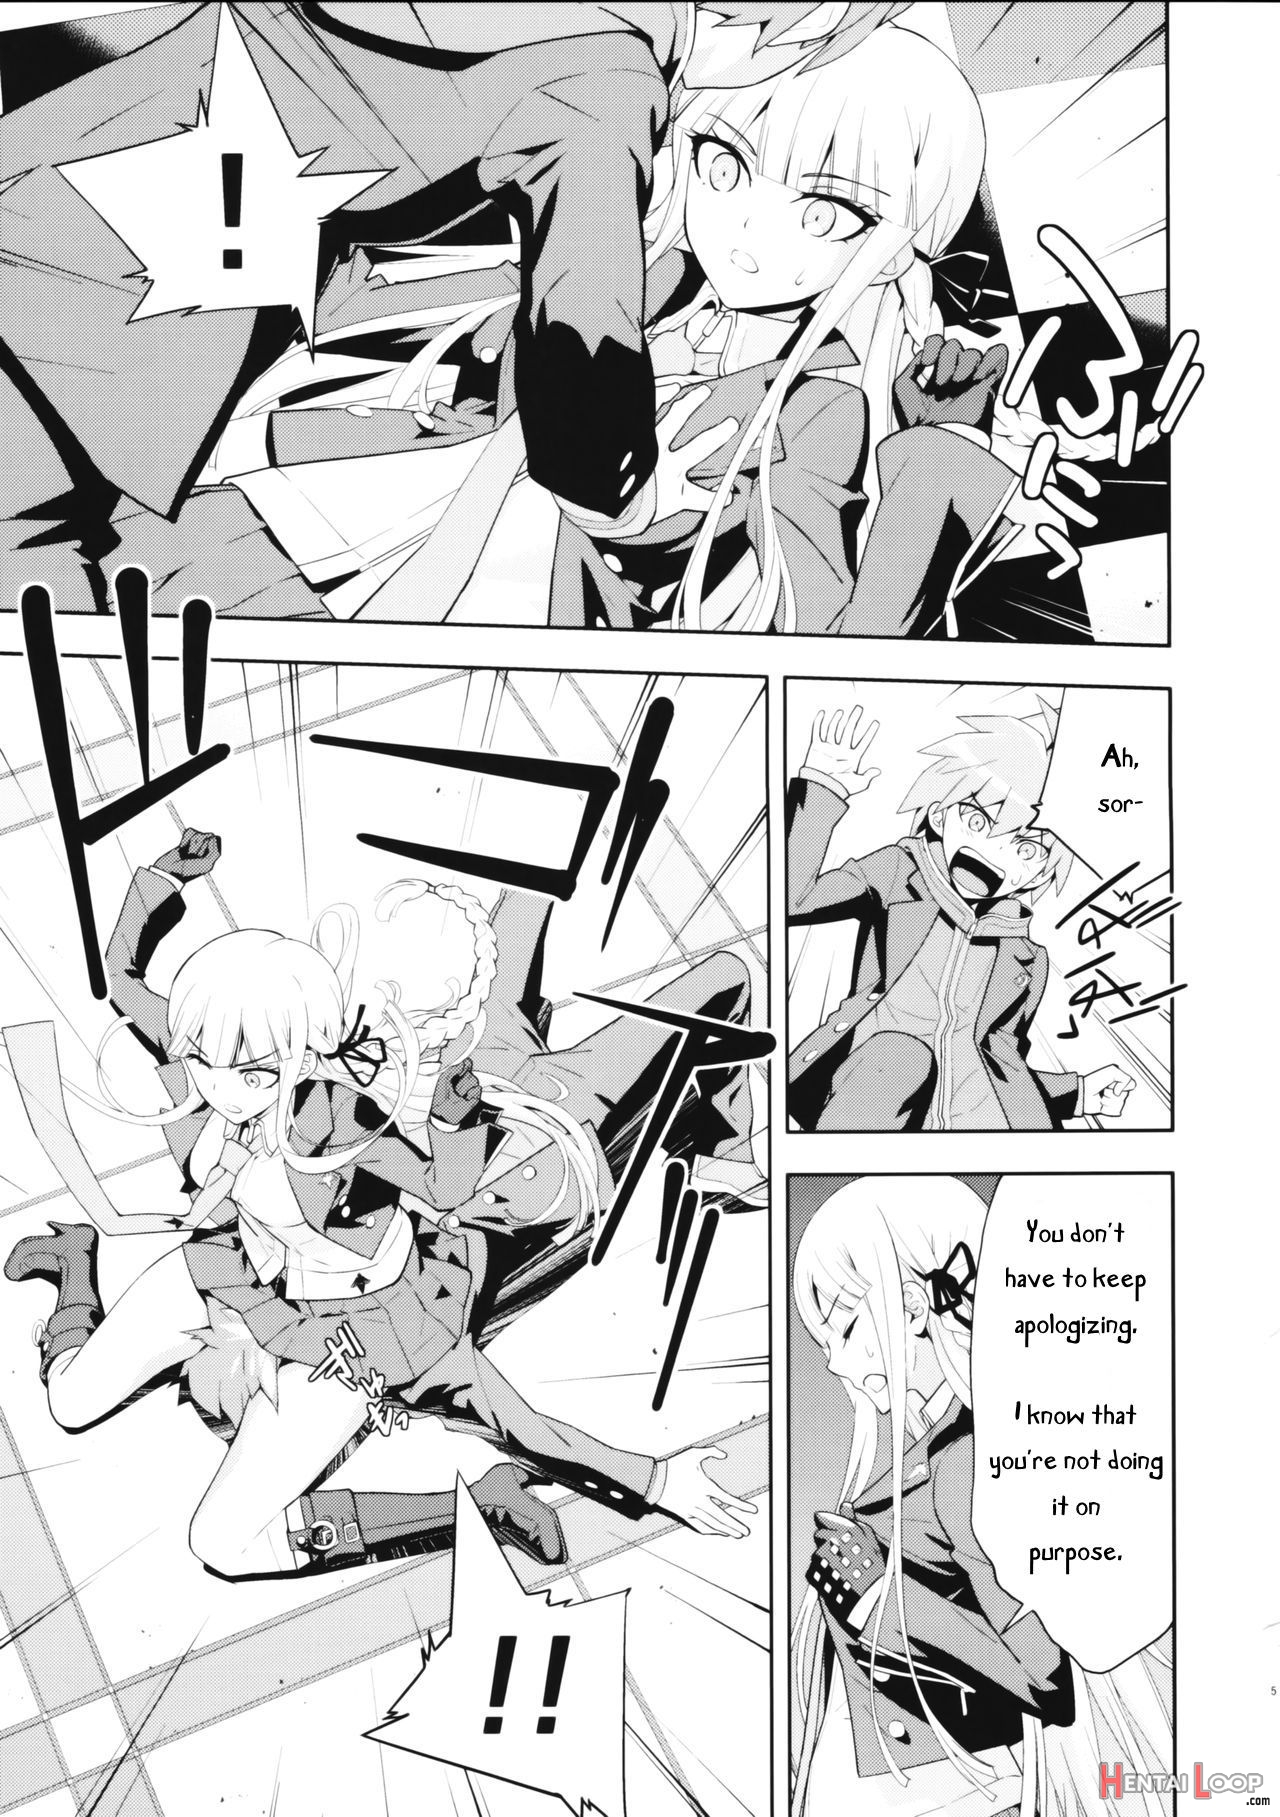 Accident 2 page 6